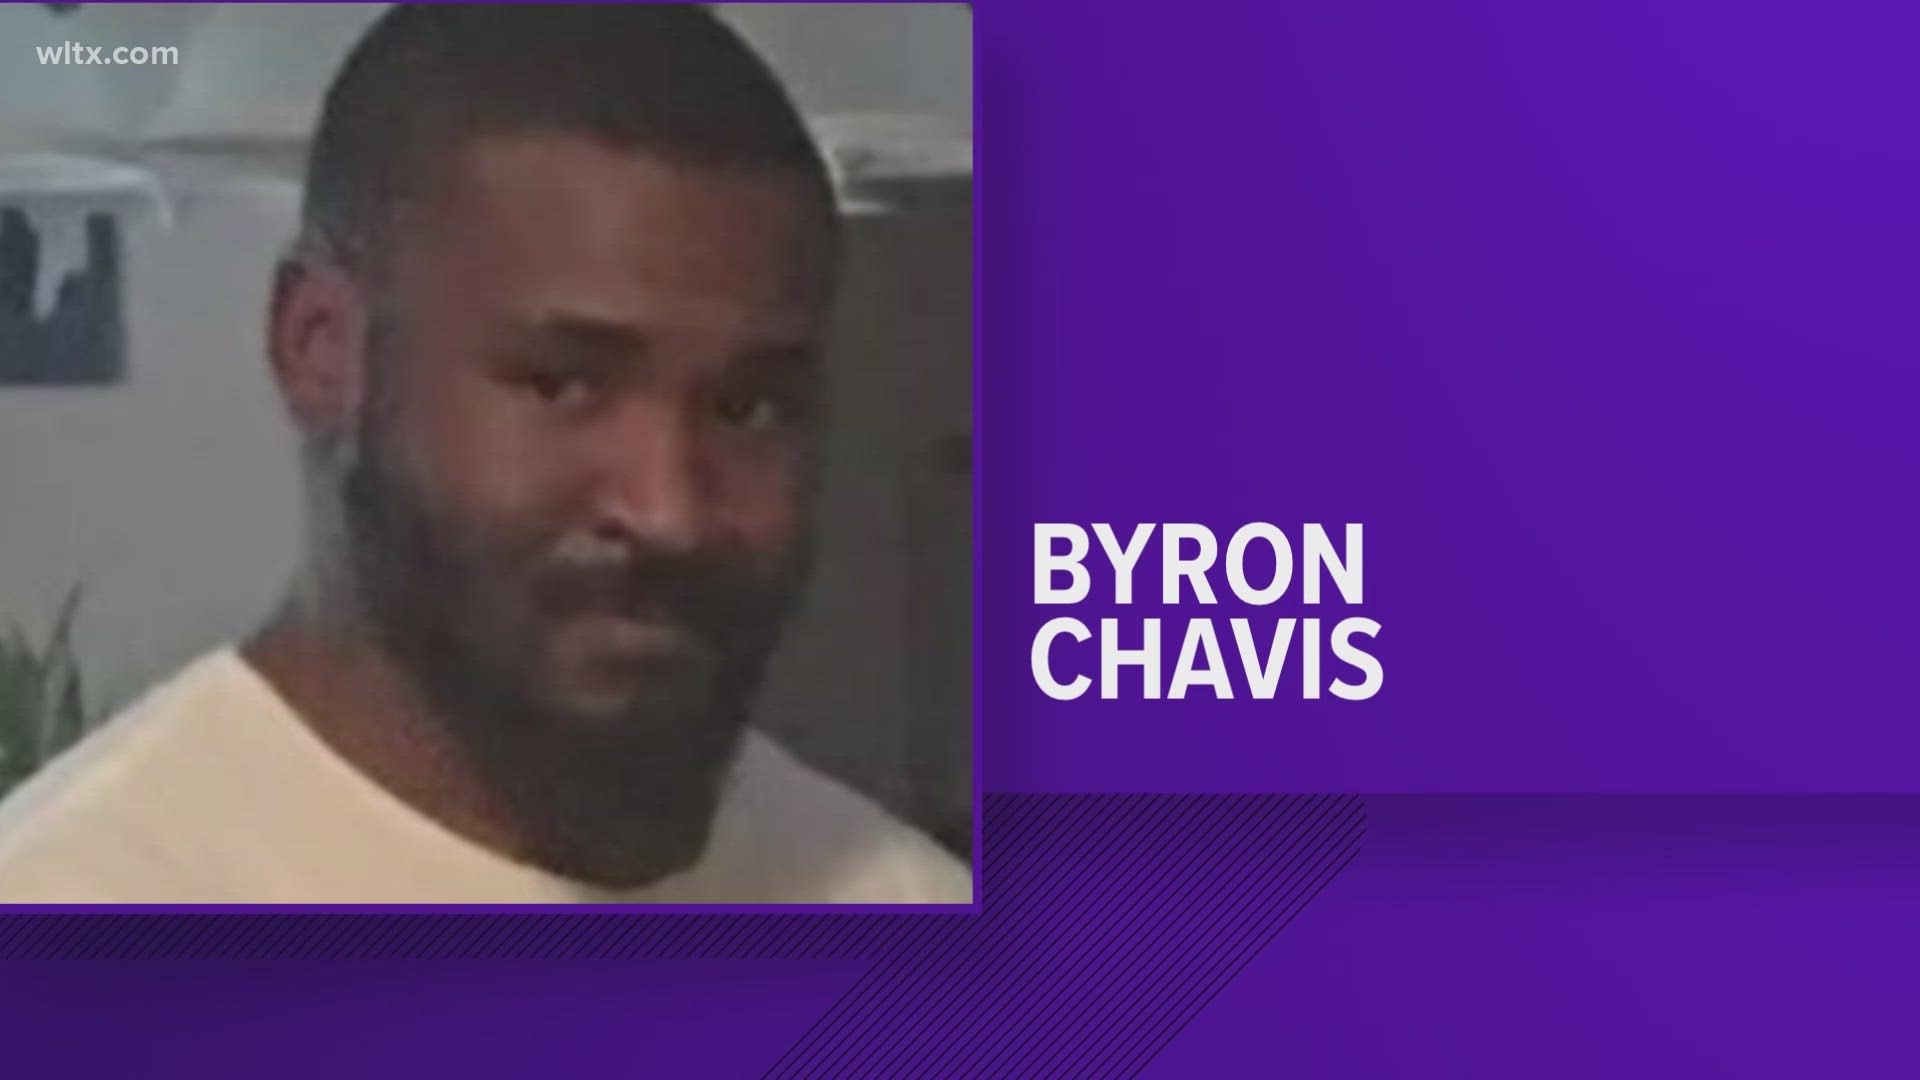 Byron Jeffrey Davis, who is 5'7" tall and weighs round 174 lbs, was last seen wearing a black zip up hoodie and black sweatpants.